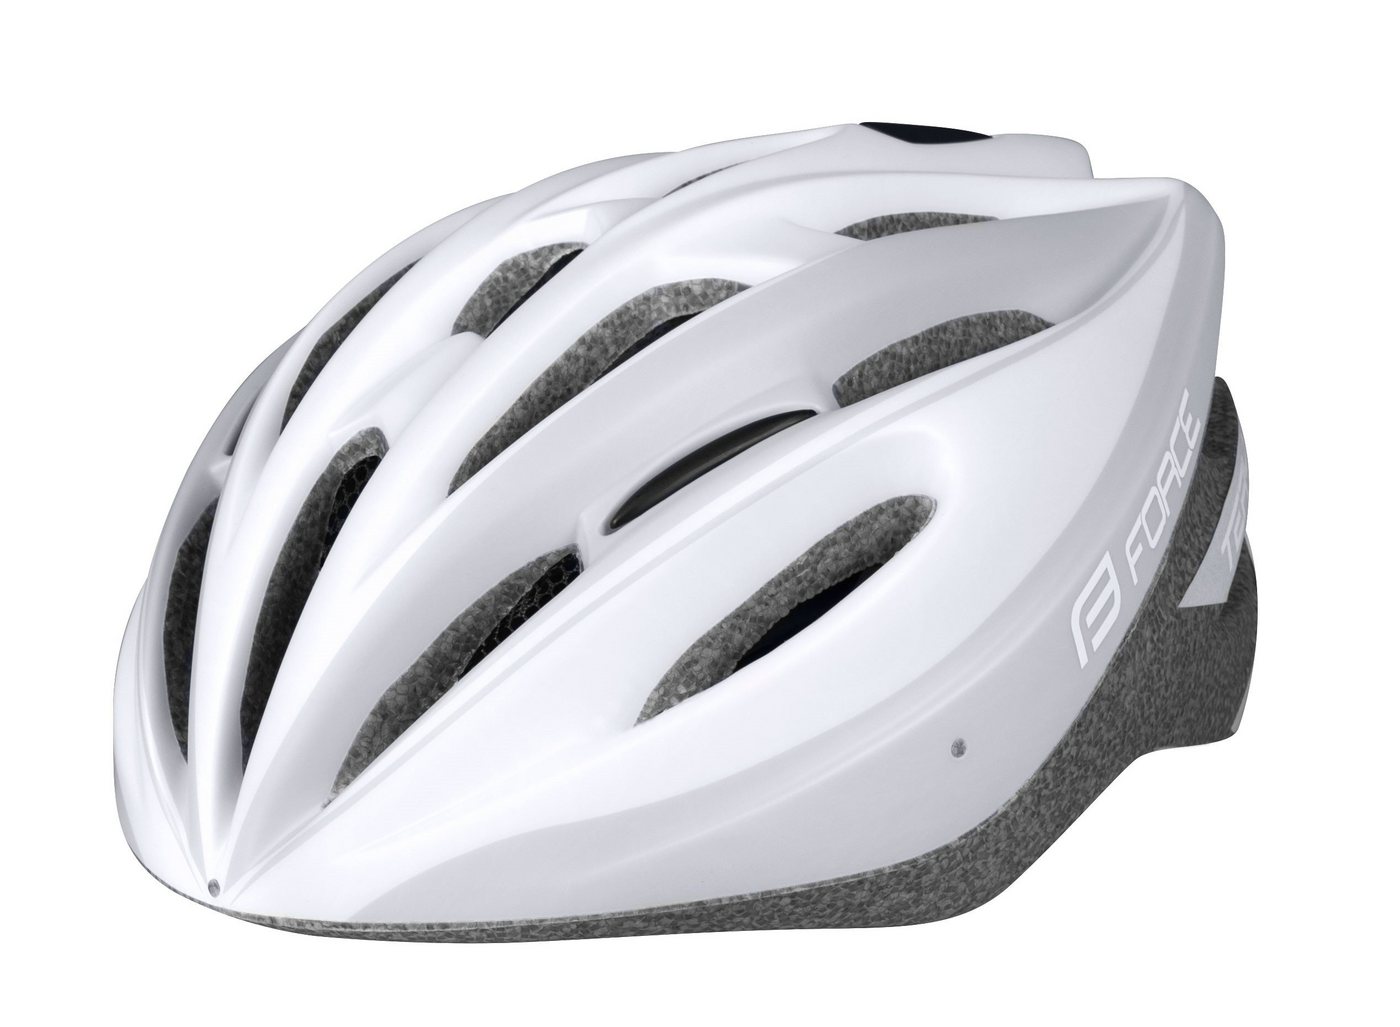 FORCE Fahrradhelm Helm FORCE TERY white-grey S - M von FORCE